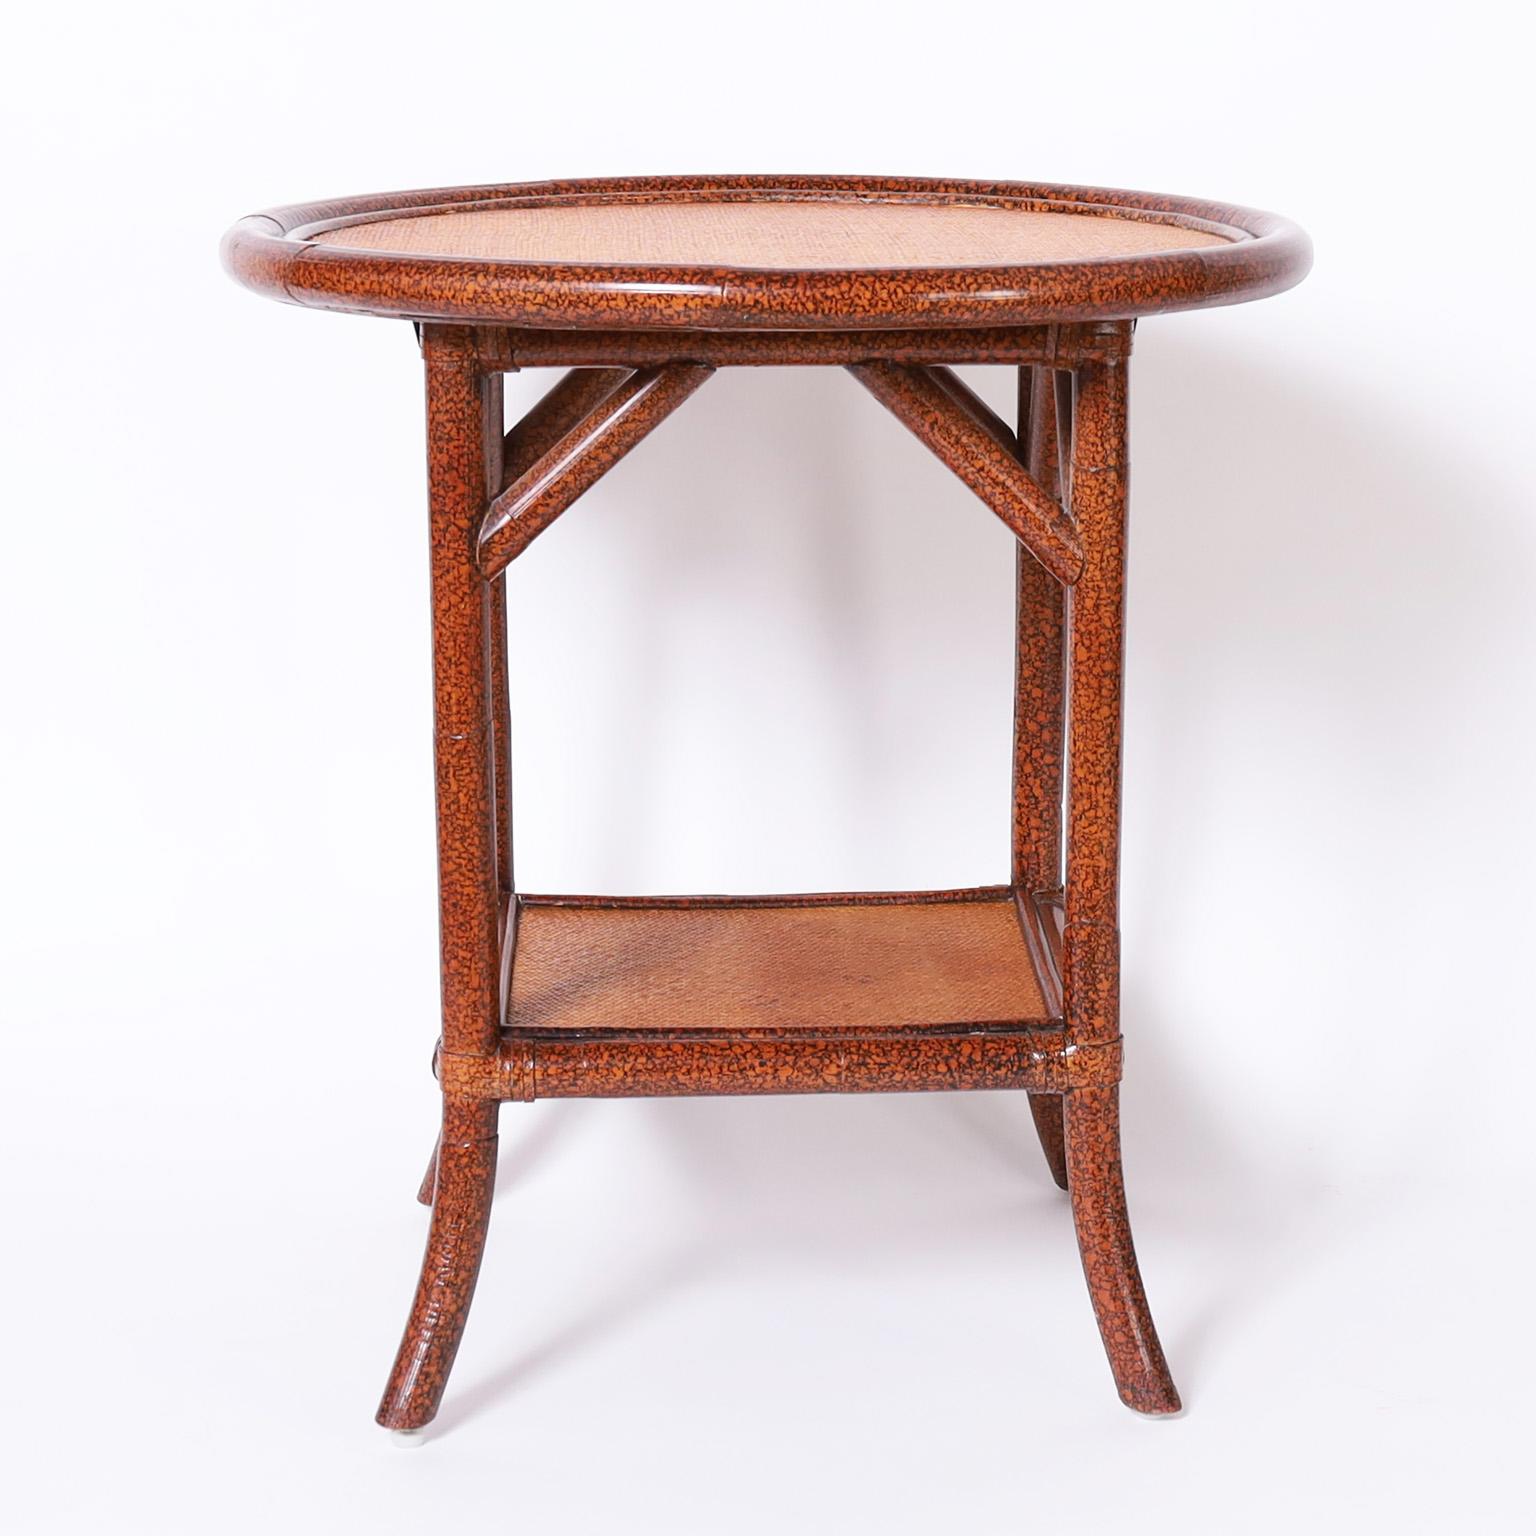 Pair of British Colonial style stands or tables with faux bamboo frames having a faux tortoise finish and with round tops and lower tier covered with grasscloth.